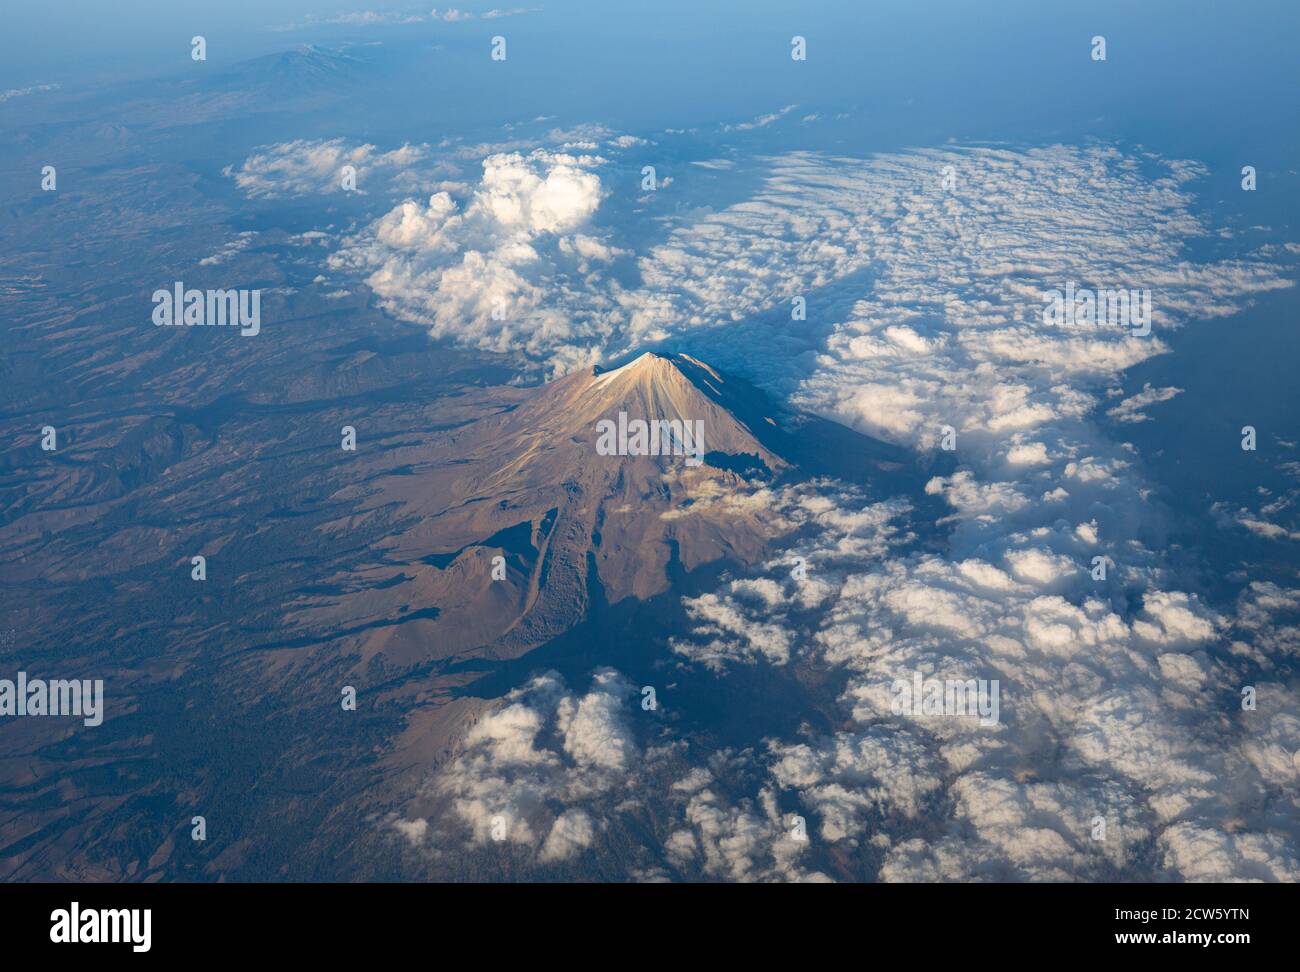 A scenic aerial view of Popocatepetl, a second highest peak in Mexico. It is an active stratovolcano, located in the states of Puebla, Morelos and Mex Stock Photo